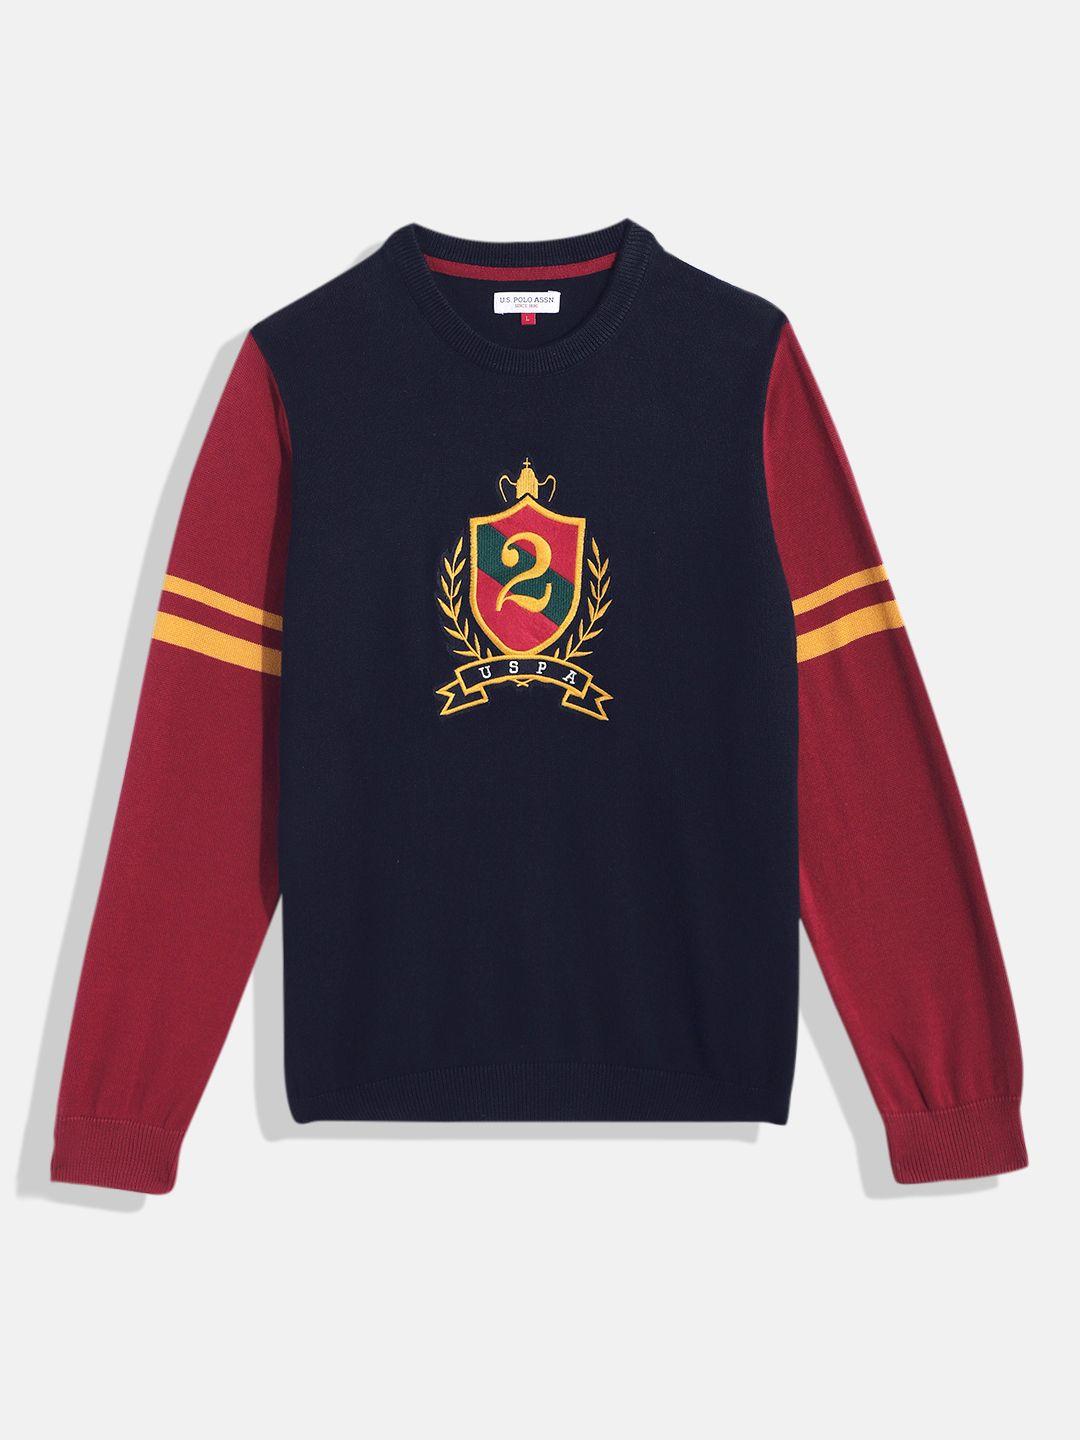 u.s. polo assn. kids boys navy blue & maroon alphanumeric embroidered pure cotton pullover